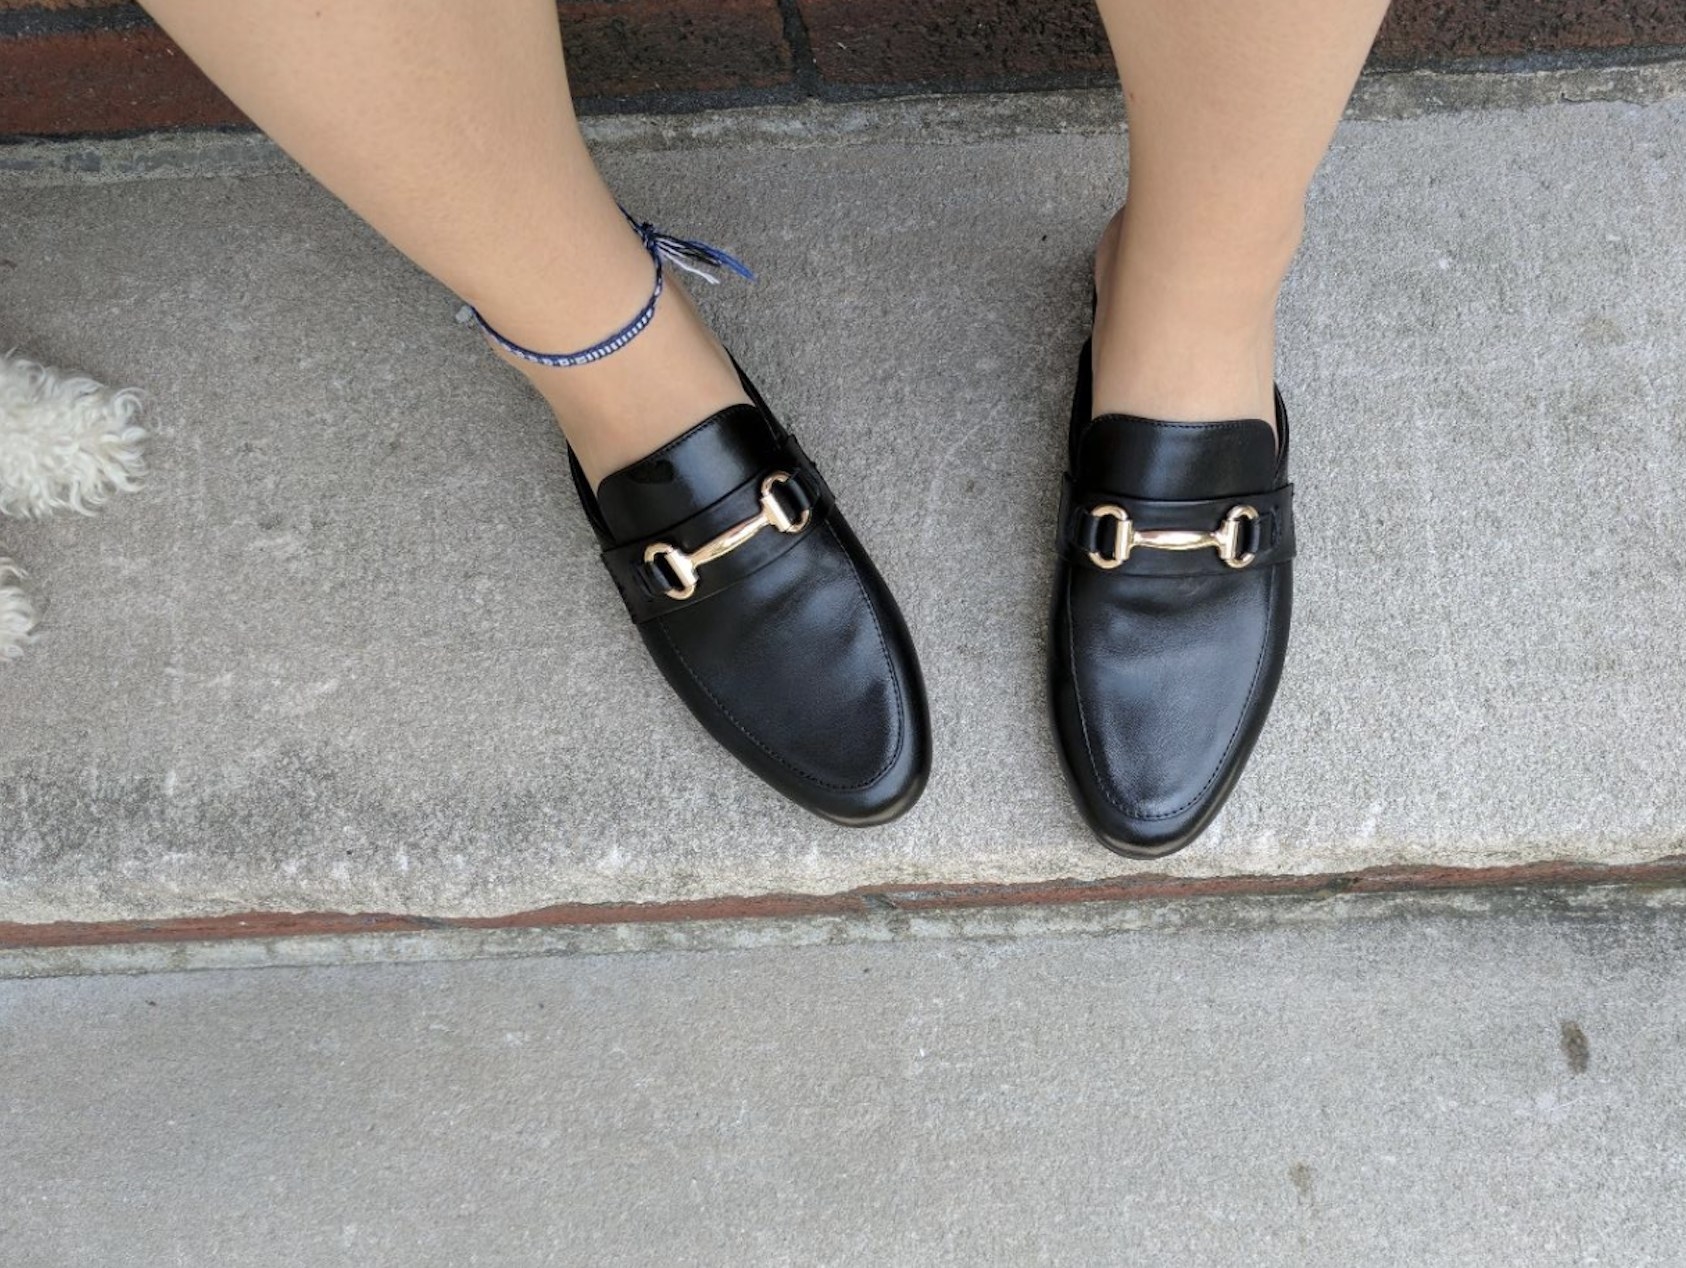 Reviewer pic of the black slip on loafers with a gold buckle on top